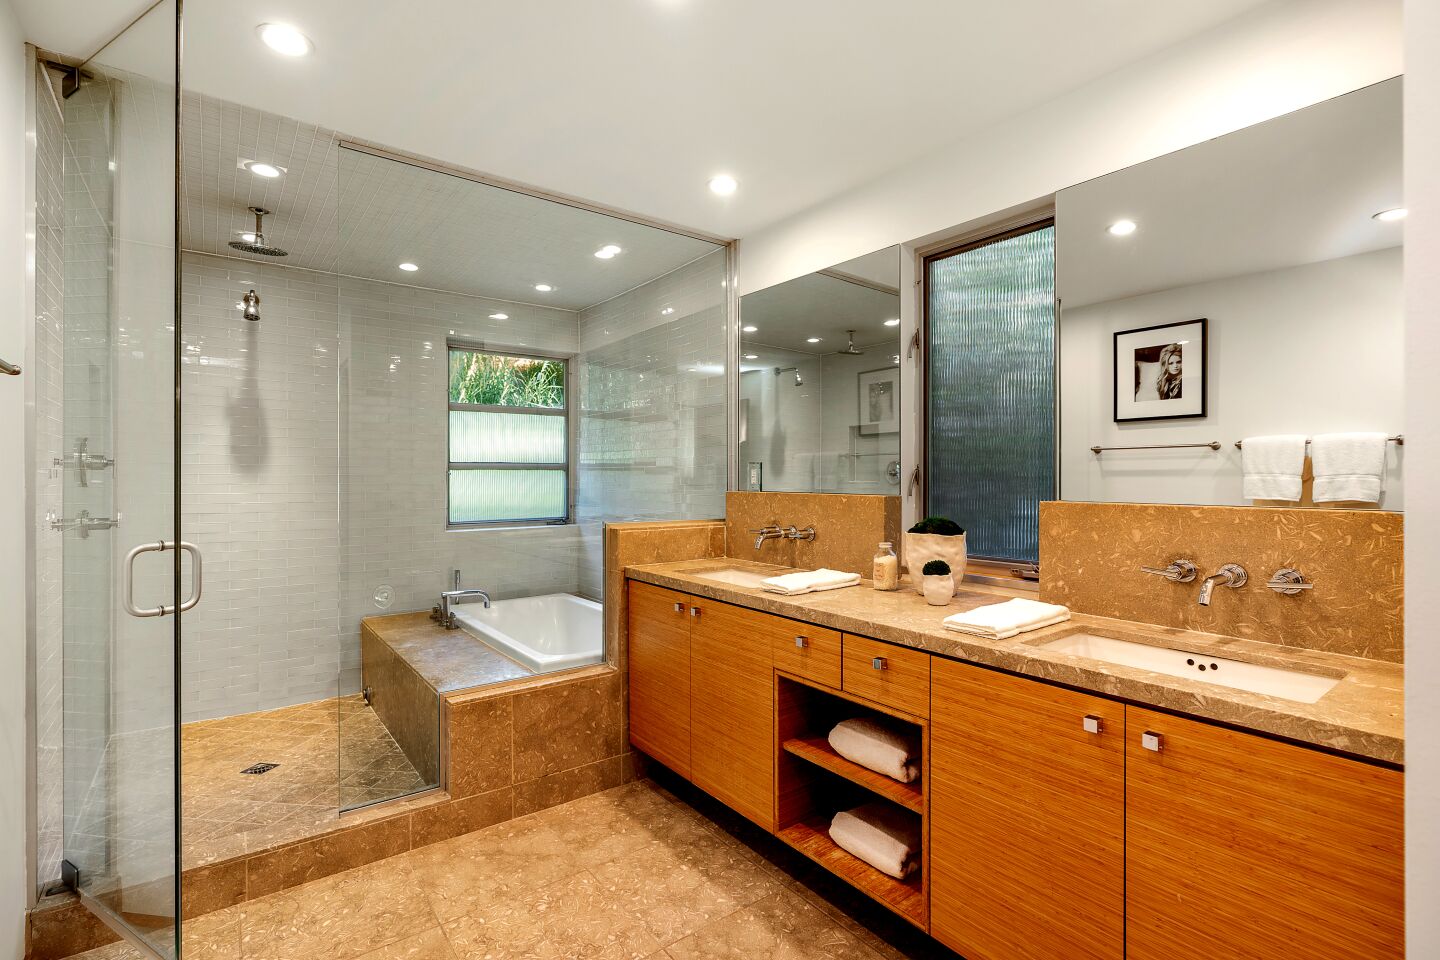 Actor Josh Lucas renovated his 1920s home in the Hollywood Hills to create an eco-friendly residence.